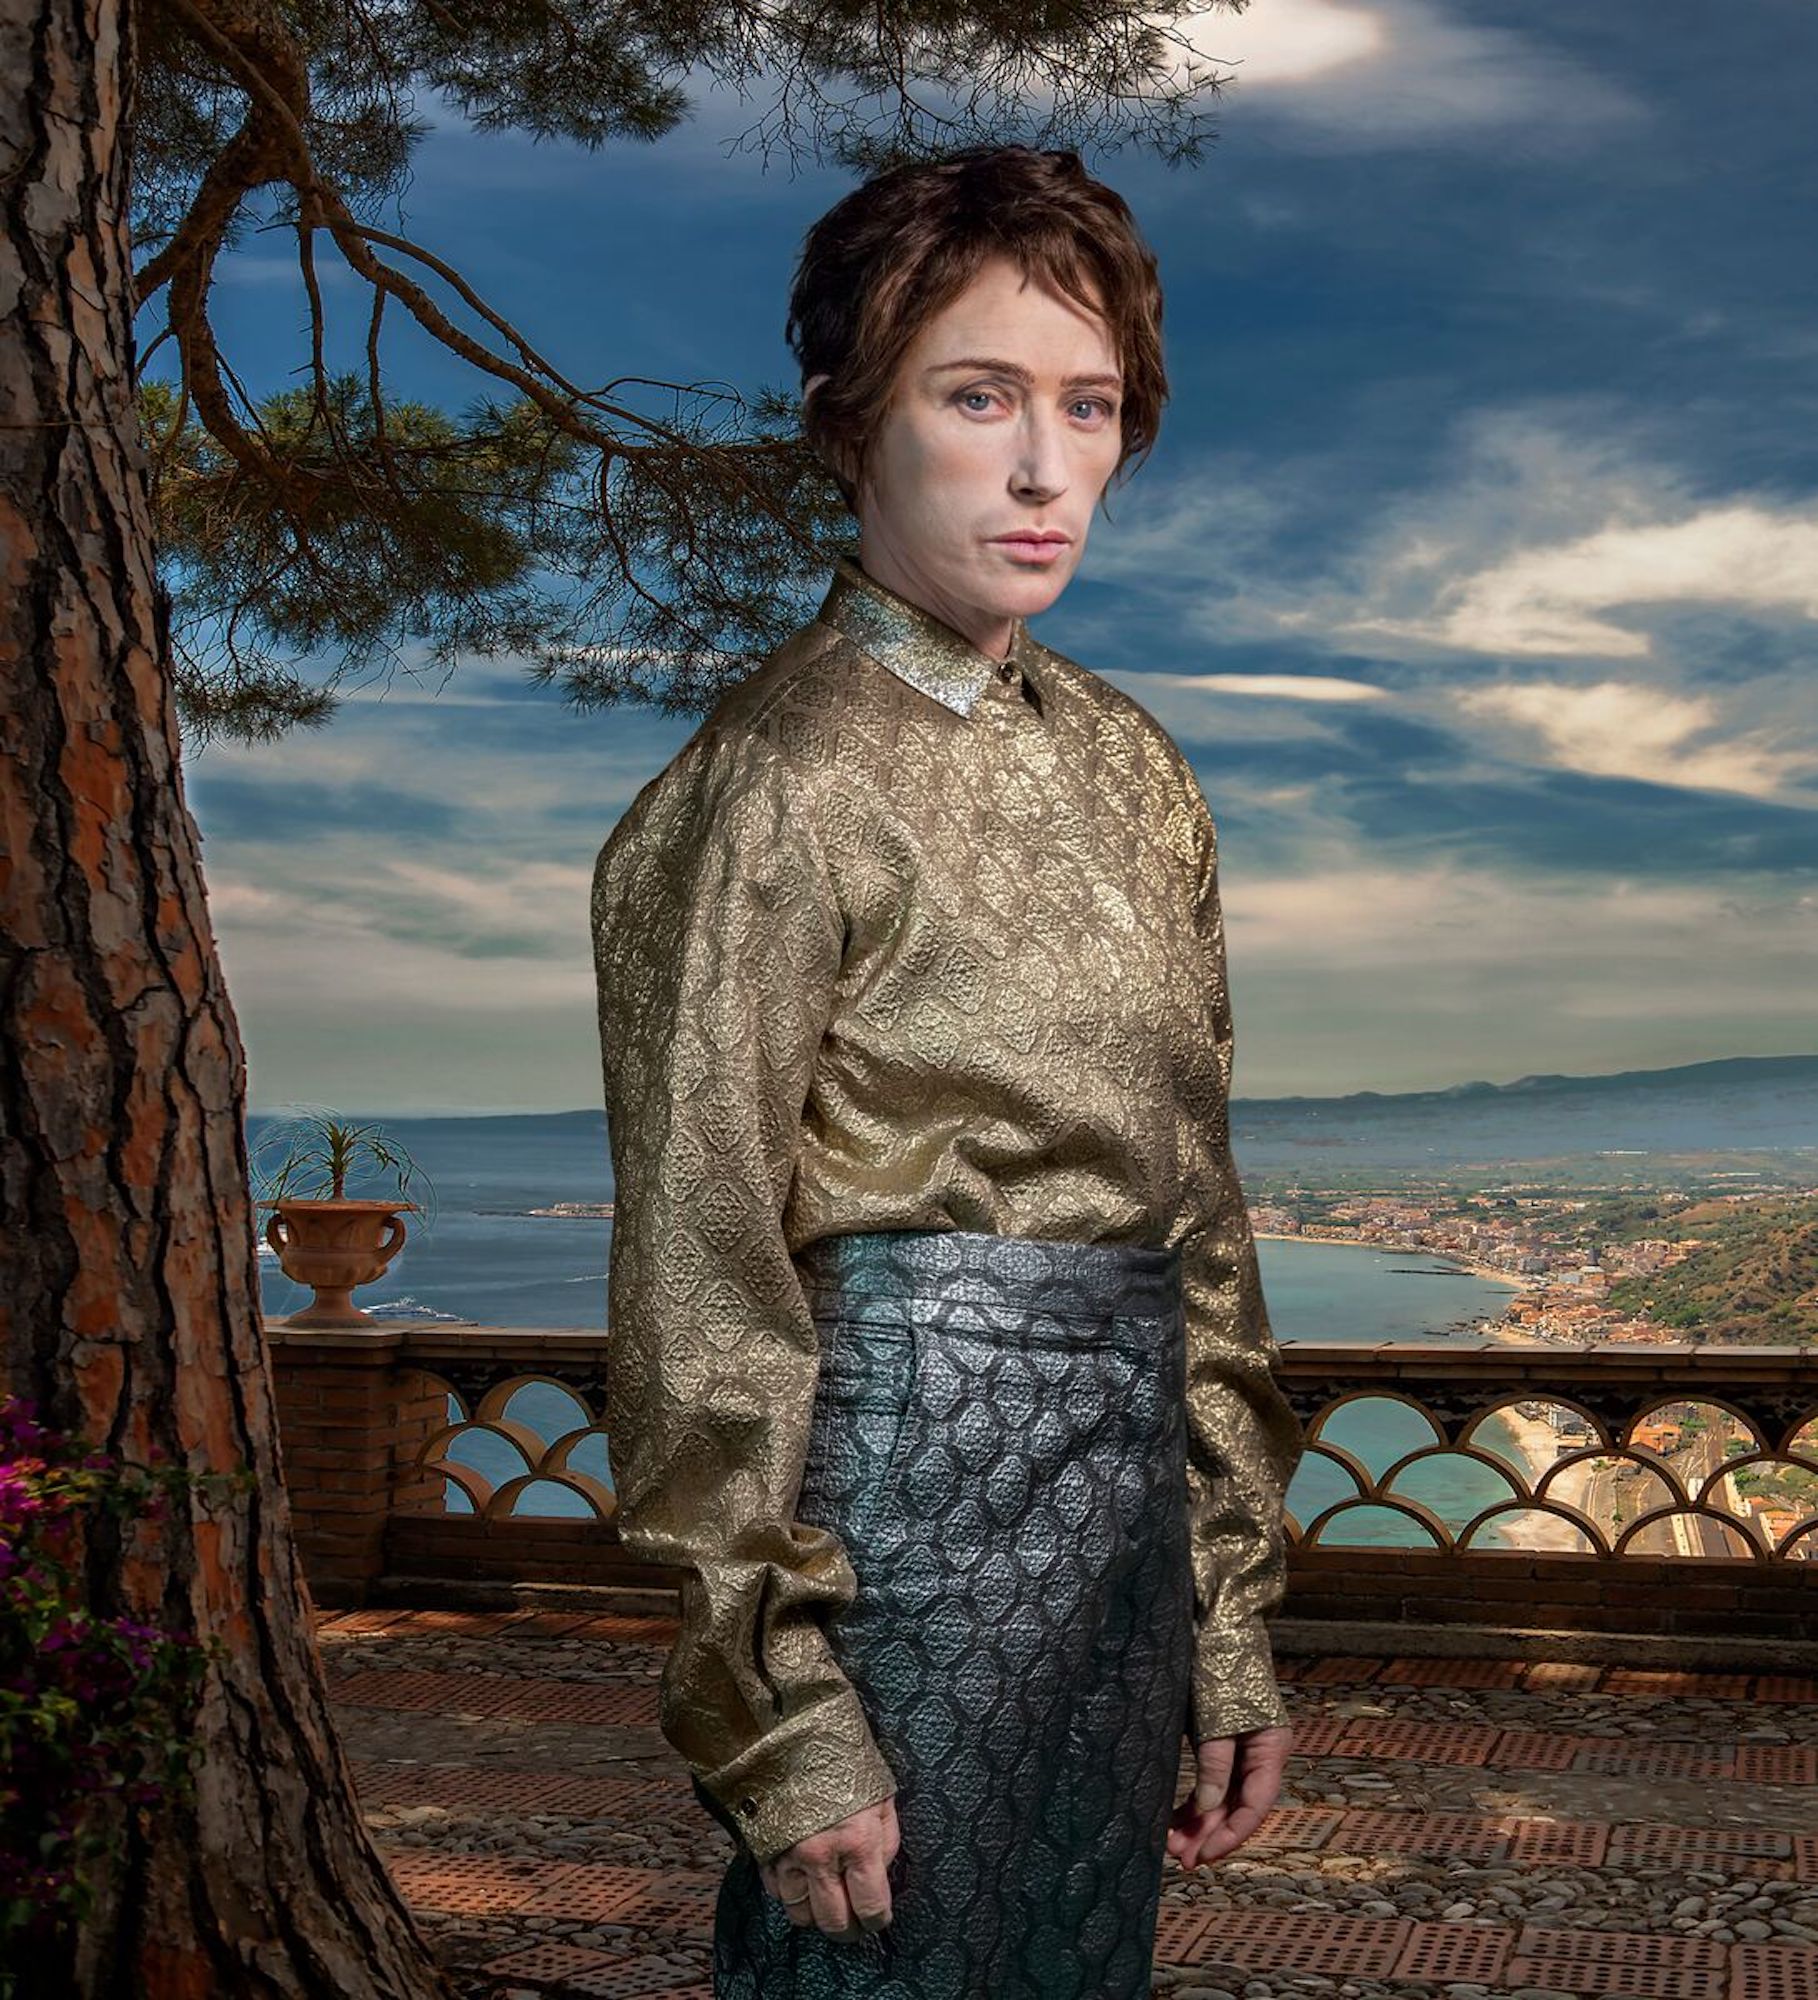 The Multiple Worlds of Cindy Sherman's History Portraits